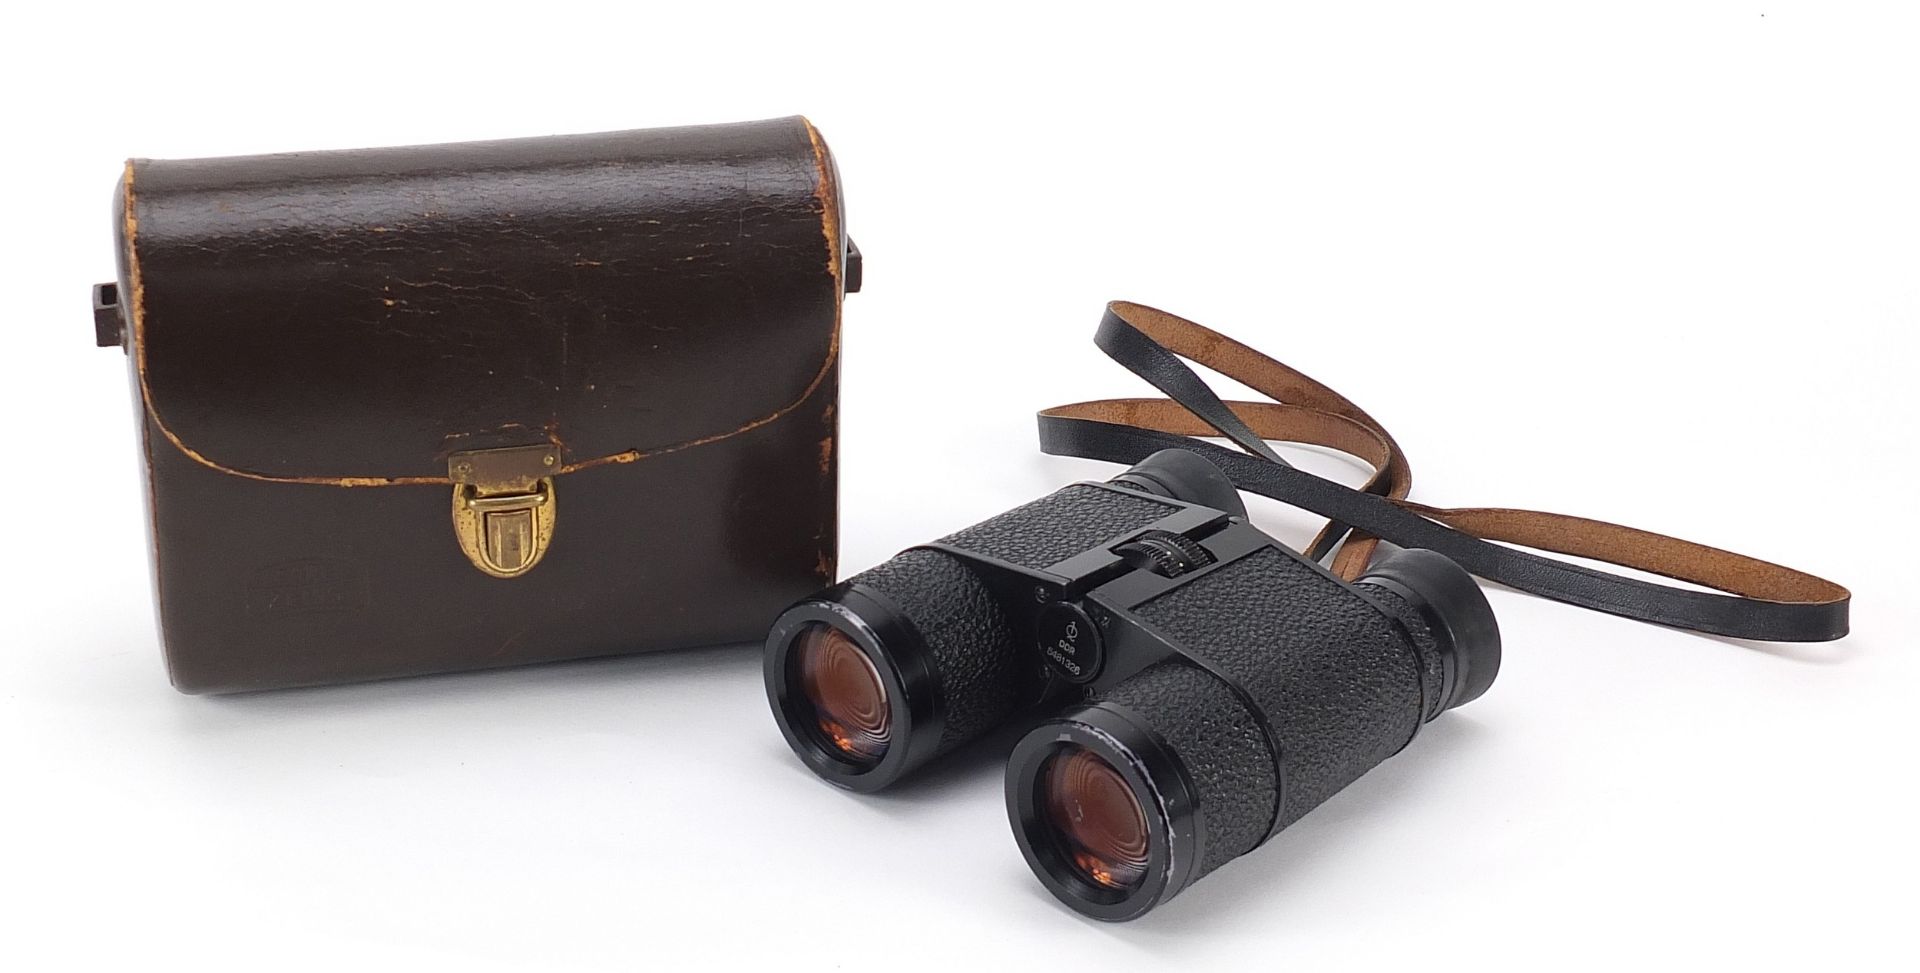 Carl Zeiss Jena binoculars with case numbered 5481326